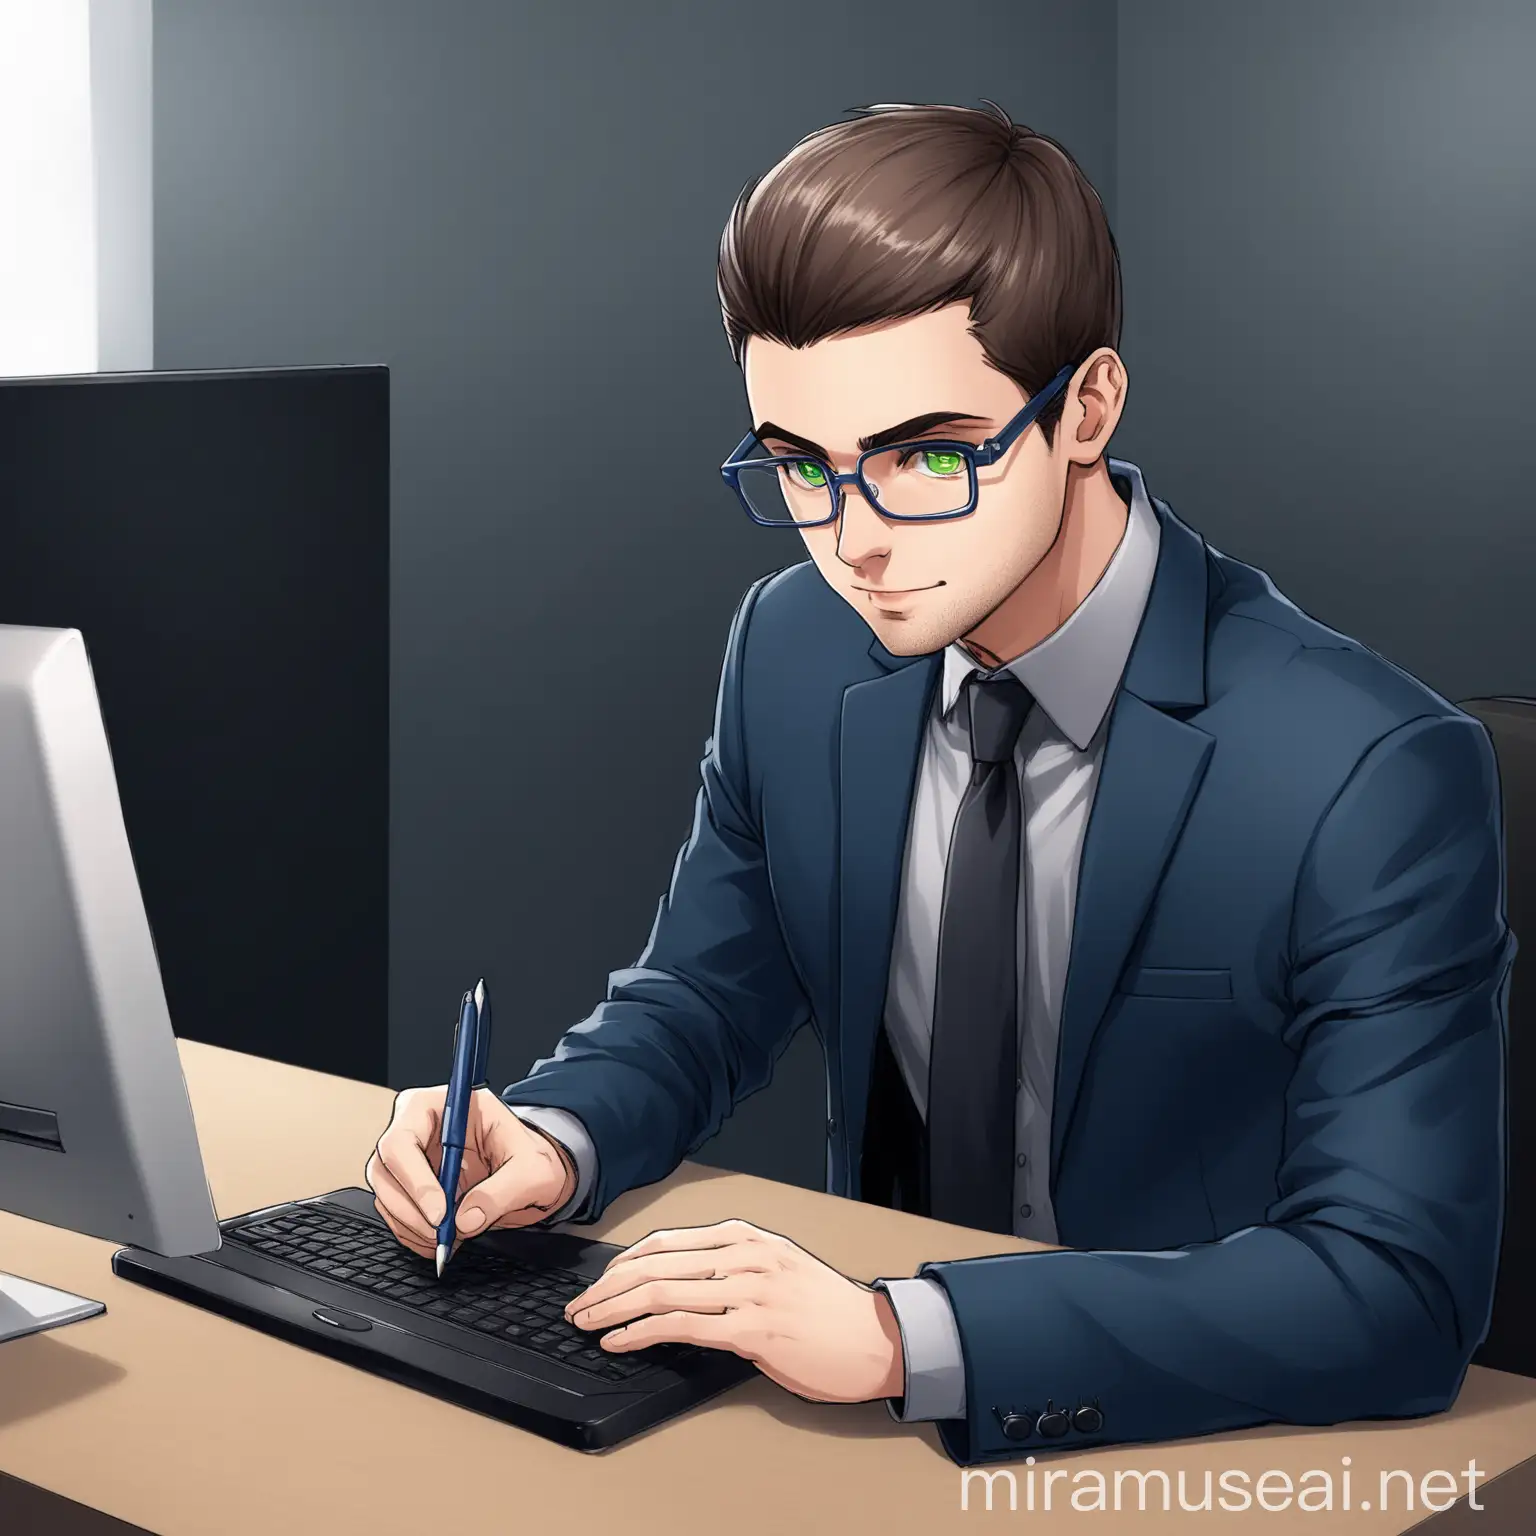 Young 30 year old european man with a small smile, very short brown hair, with some grey hair in the mix, with rectangular glasses, green iris eyes, wearing dark blue suits, black shirt, dark blue tie, working on a desk as project manager, writing on a PC, like case closed style, in a 3/4 view